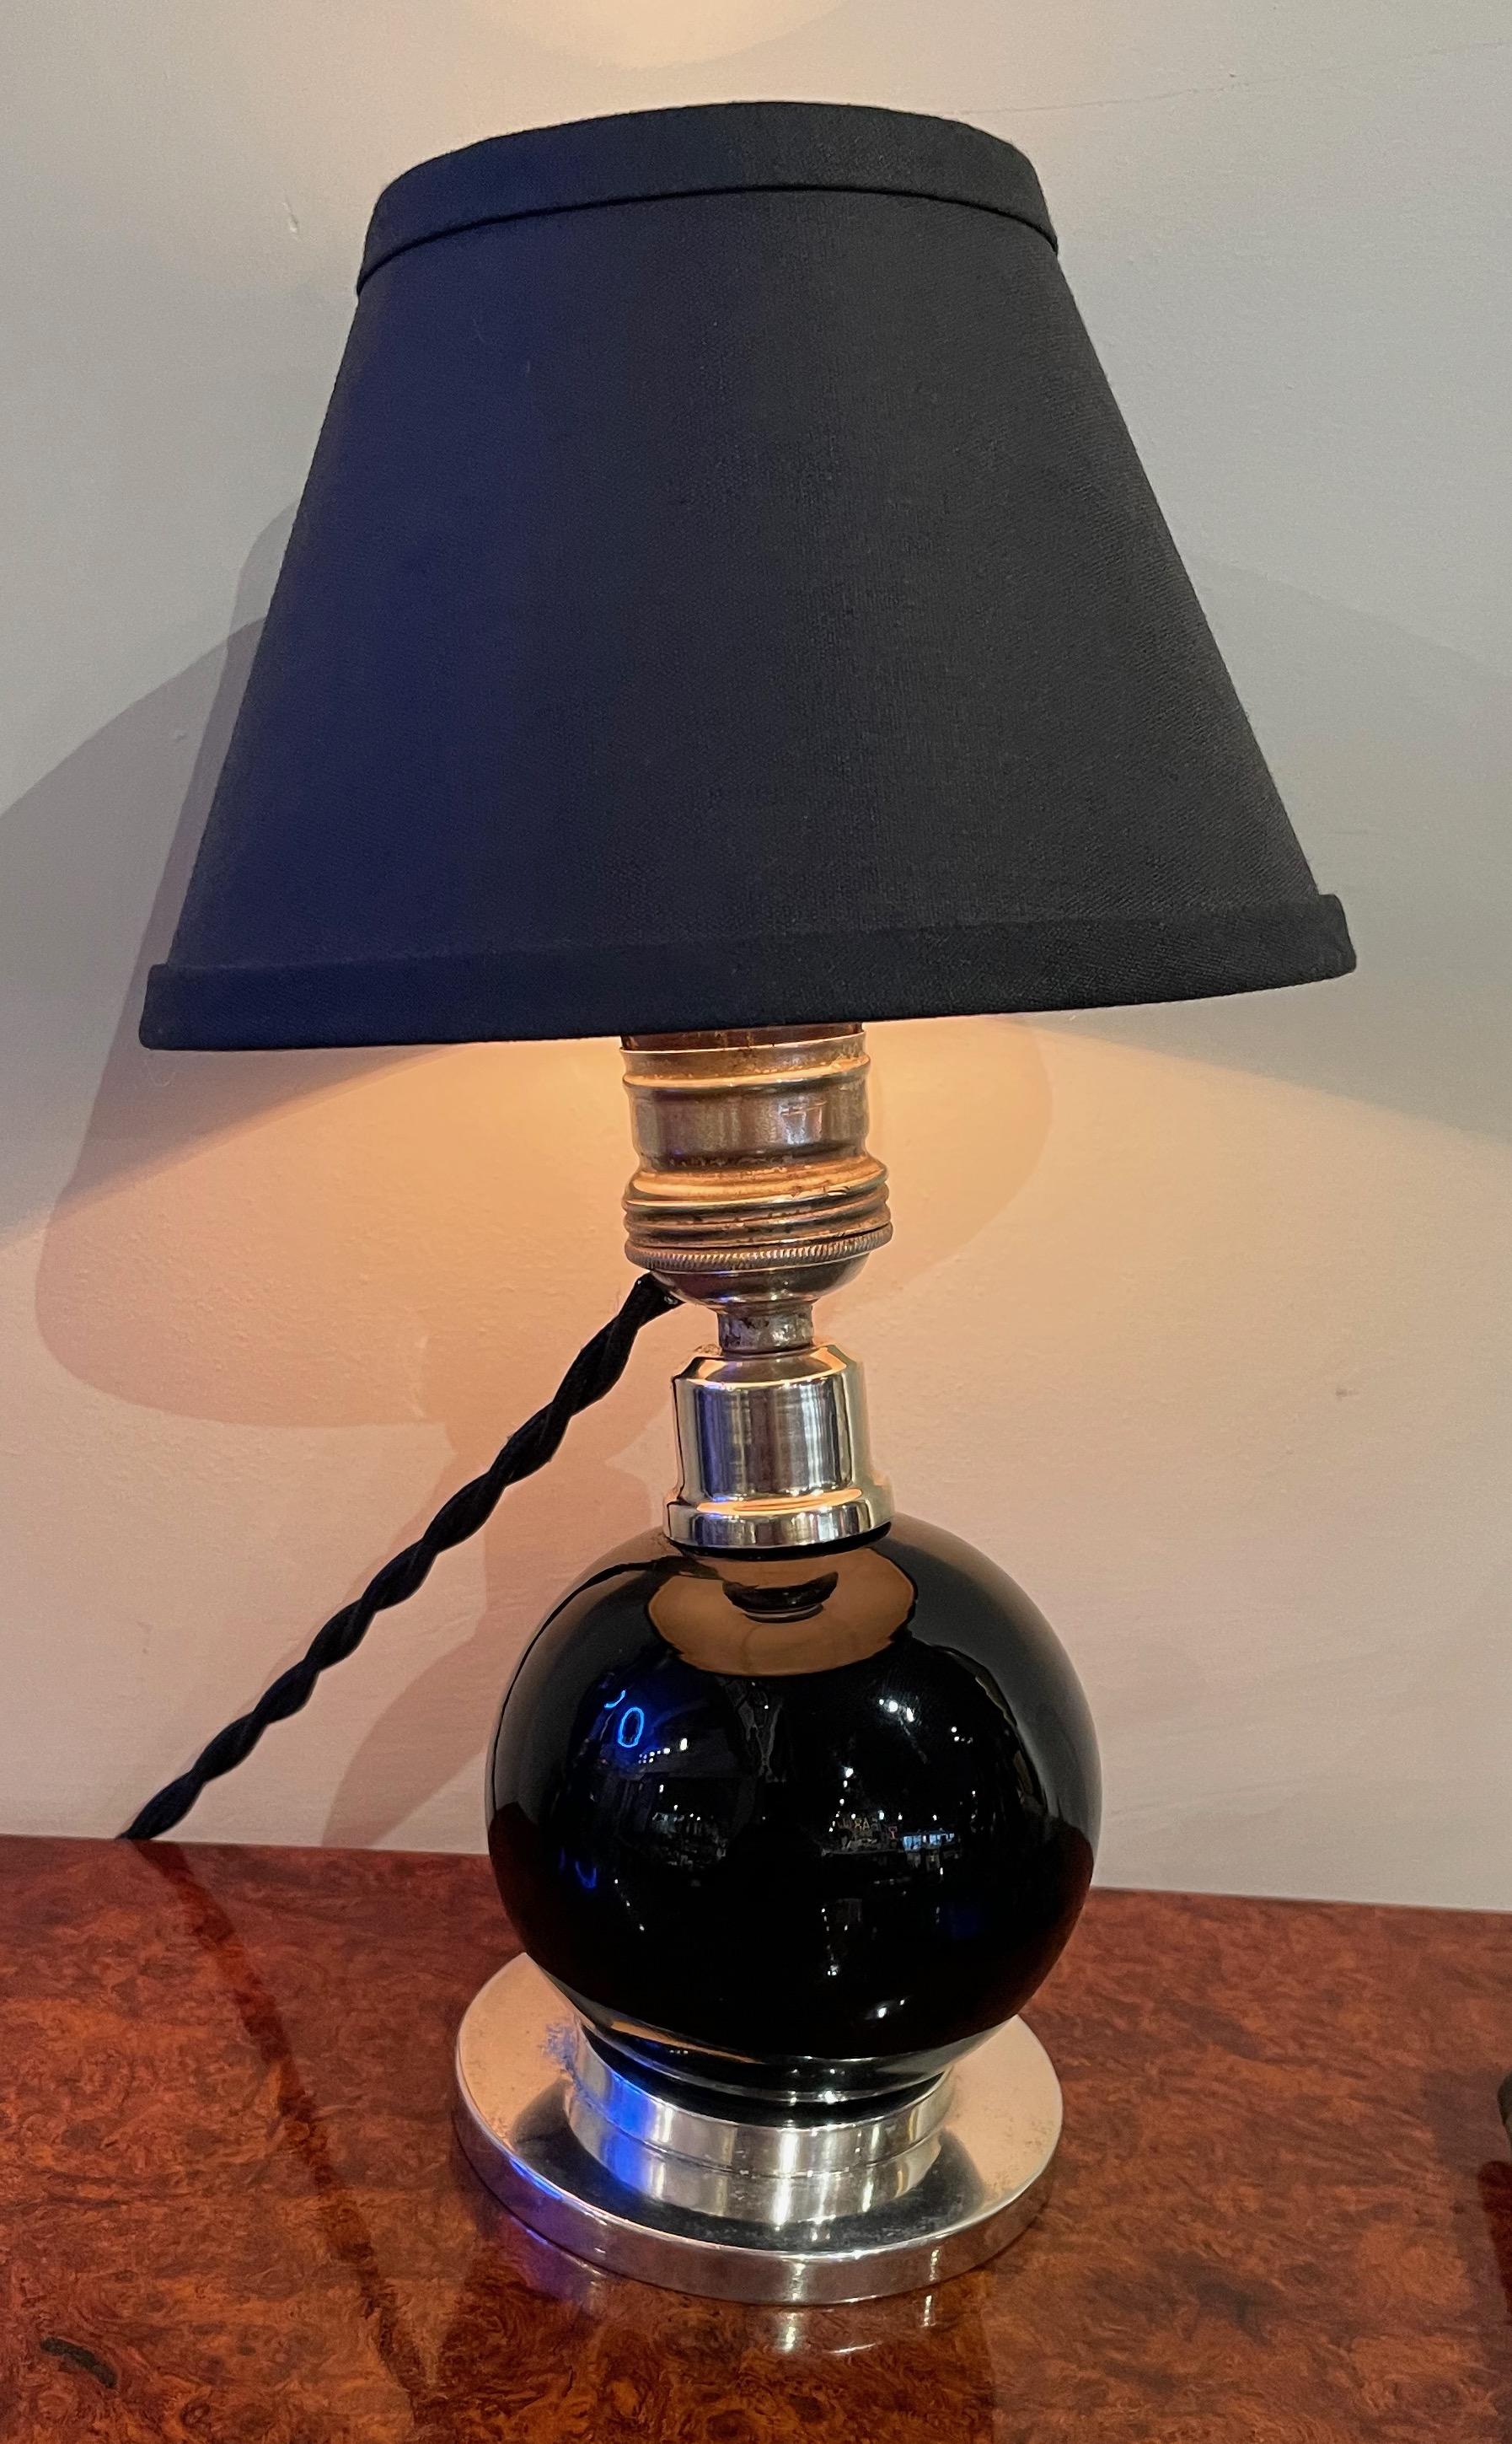 Rare Jacques Adnet lamp made with Baccarat black crystal and a nickel base. The ball can be moved to different positions. This lamp is from the 1940s and is documented in the Adnet book (model 7706). This particular lamp is in exceptional condition,